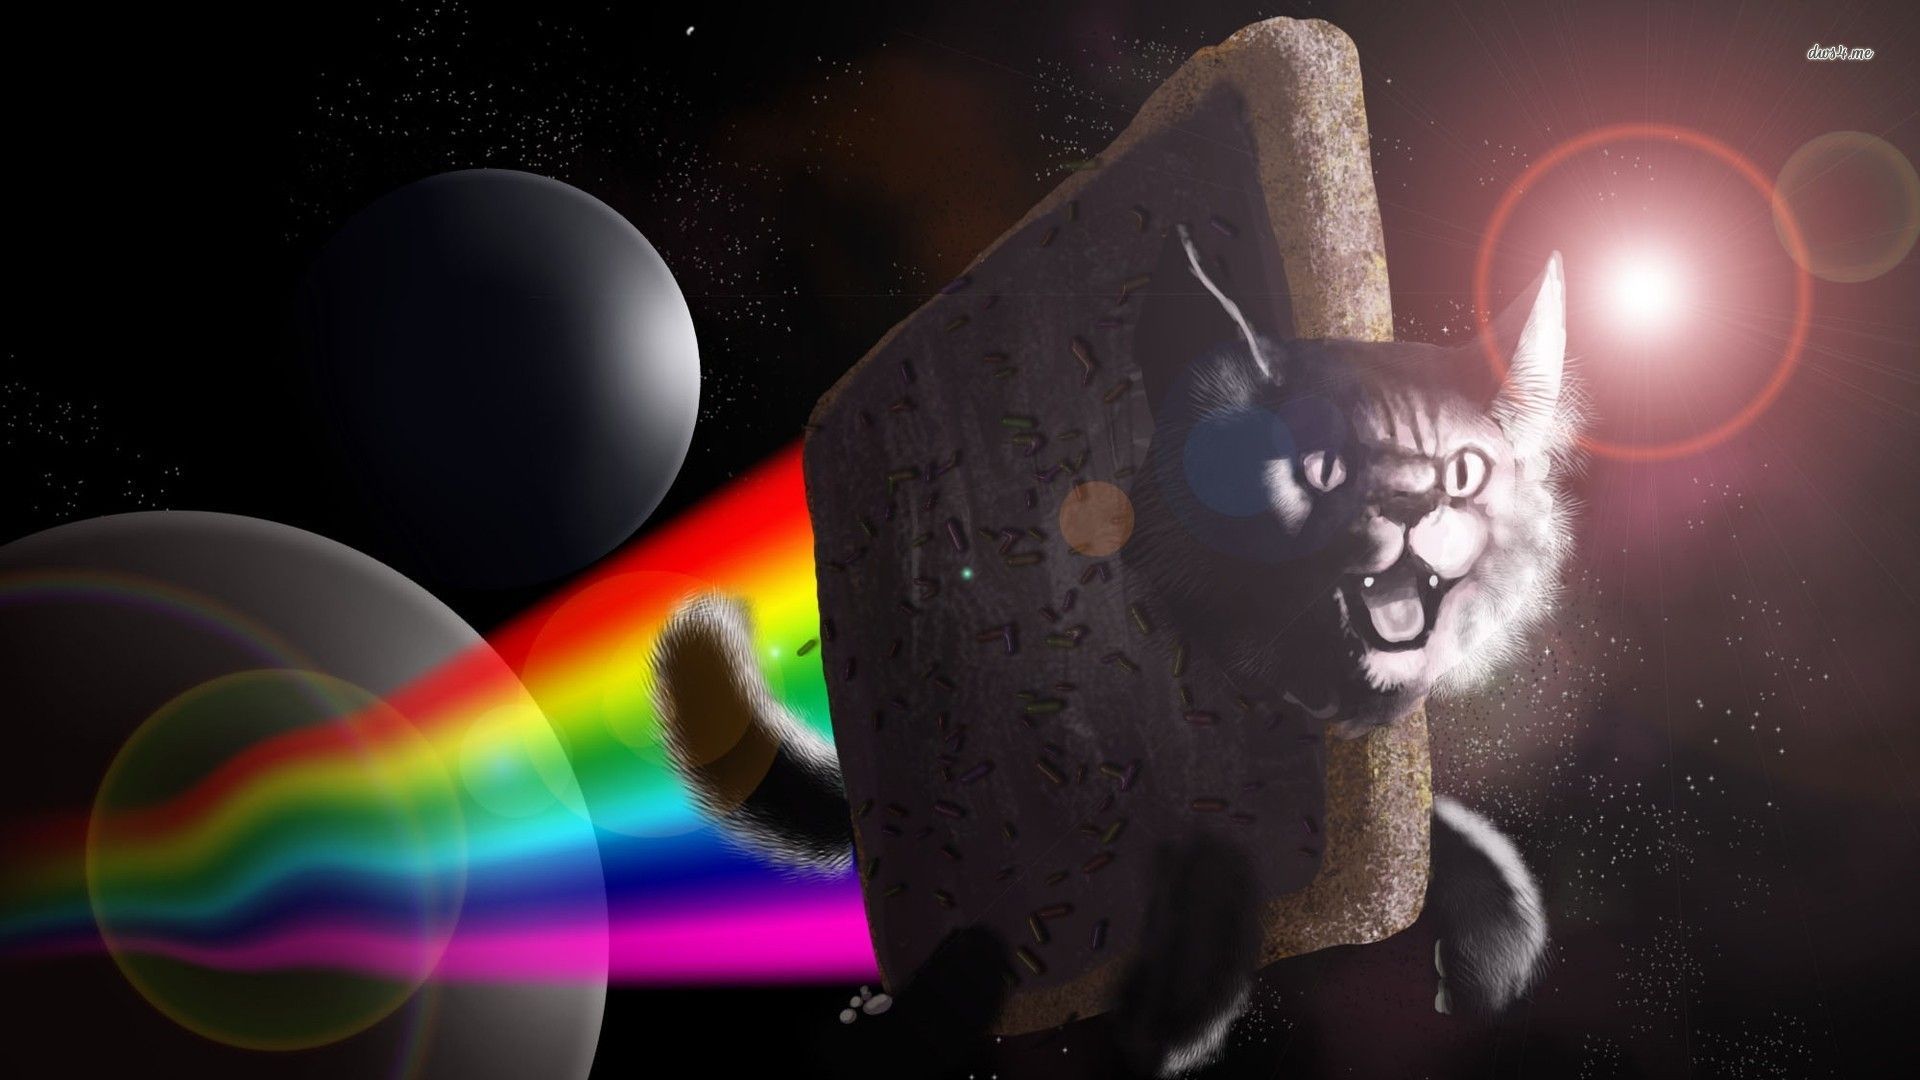 Nyan Cat Flying Away From The Planet Wallpaper Meme Wallpapers Images, Photos, Reviews